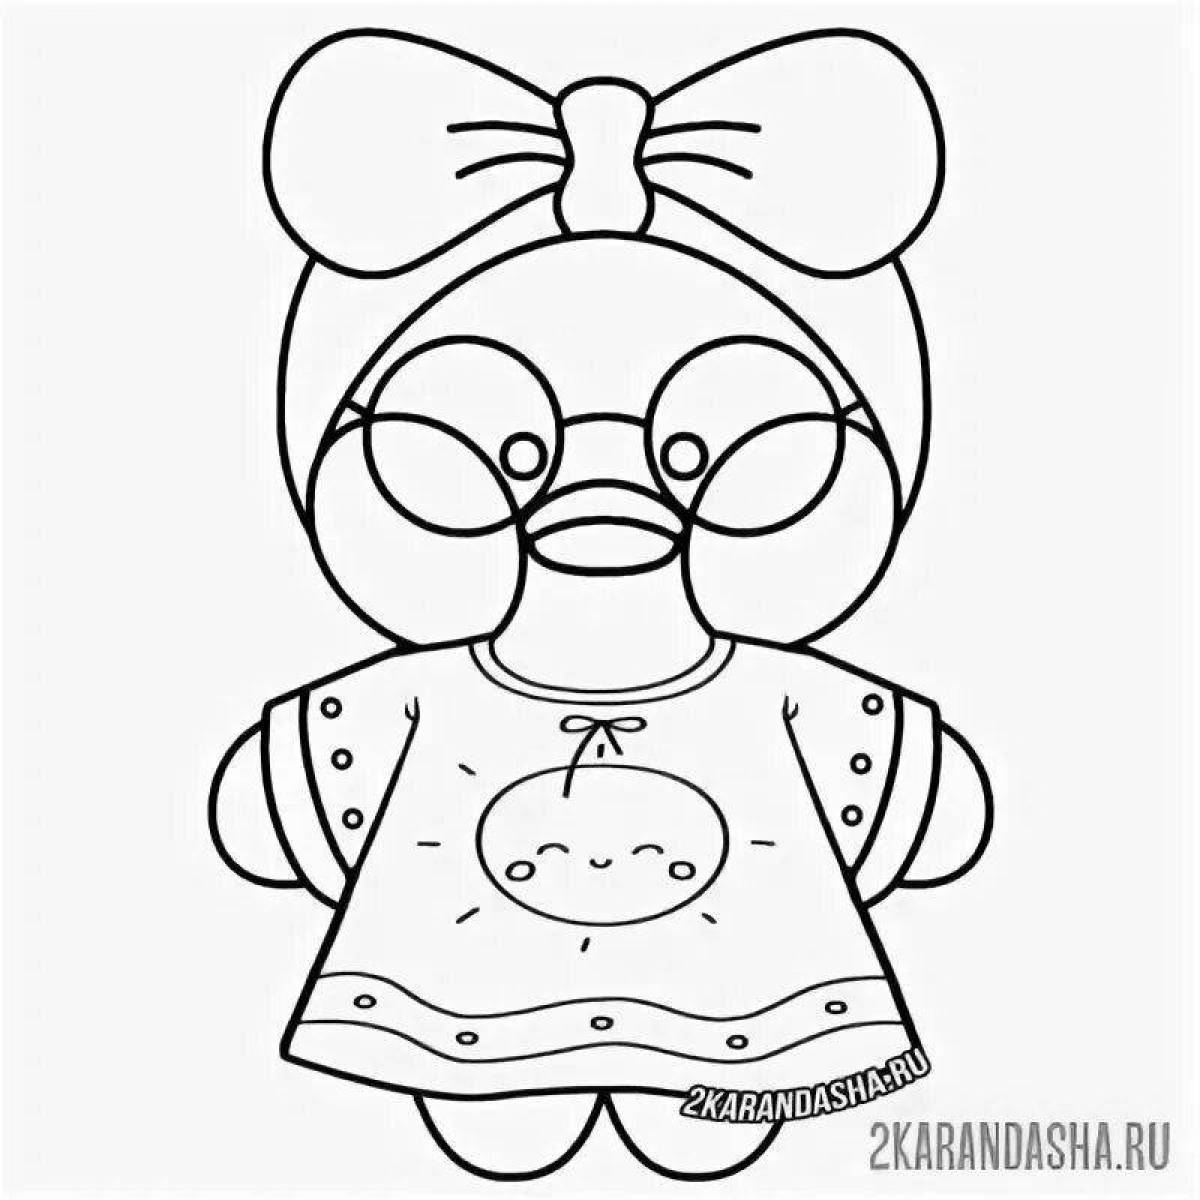 Lafanfan sparkling duck coloring page